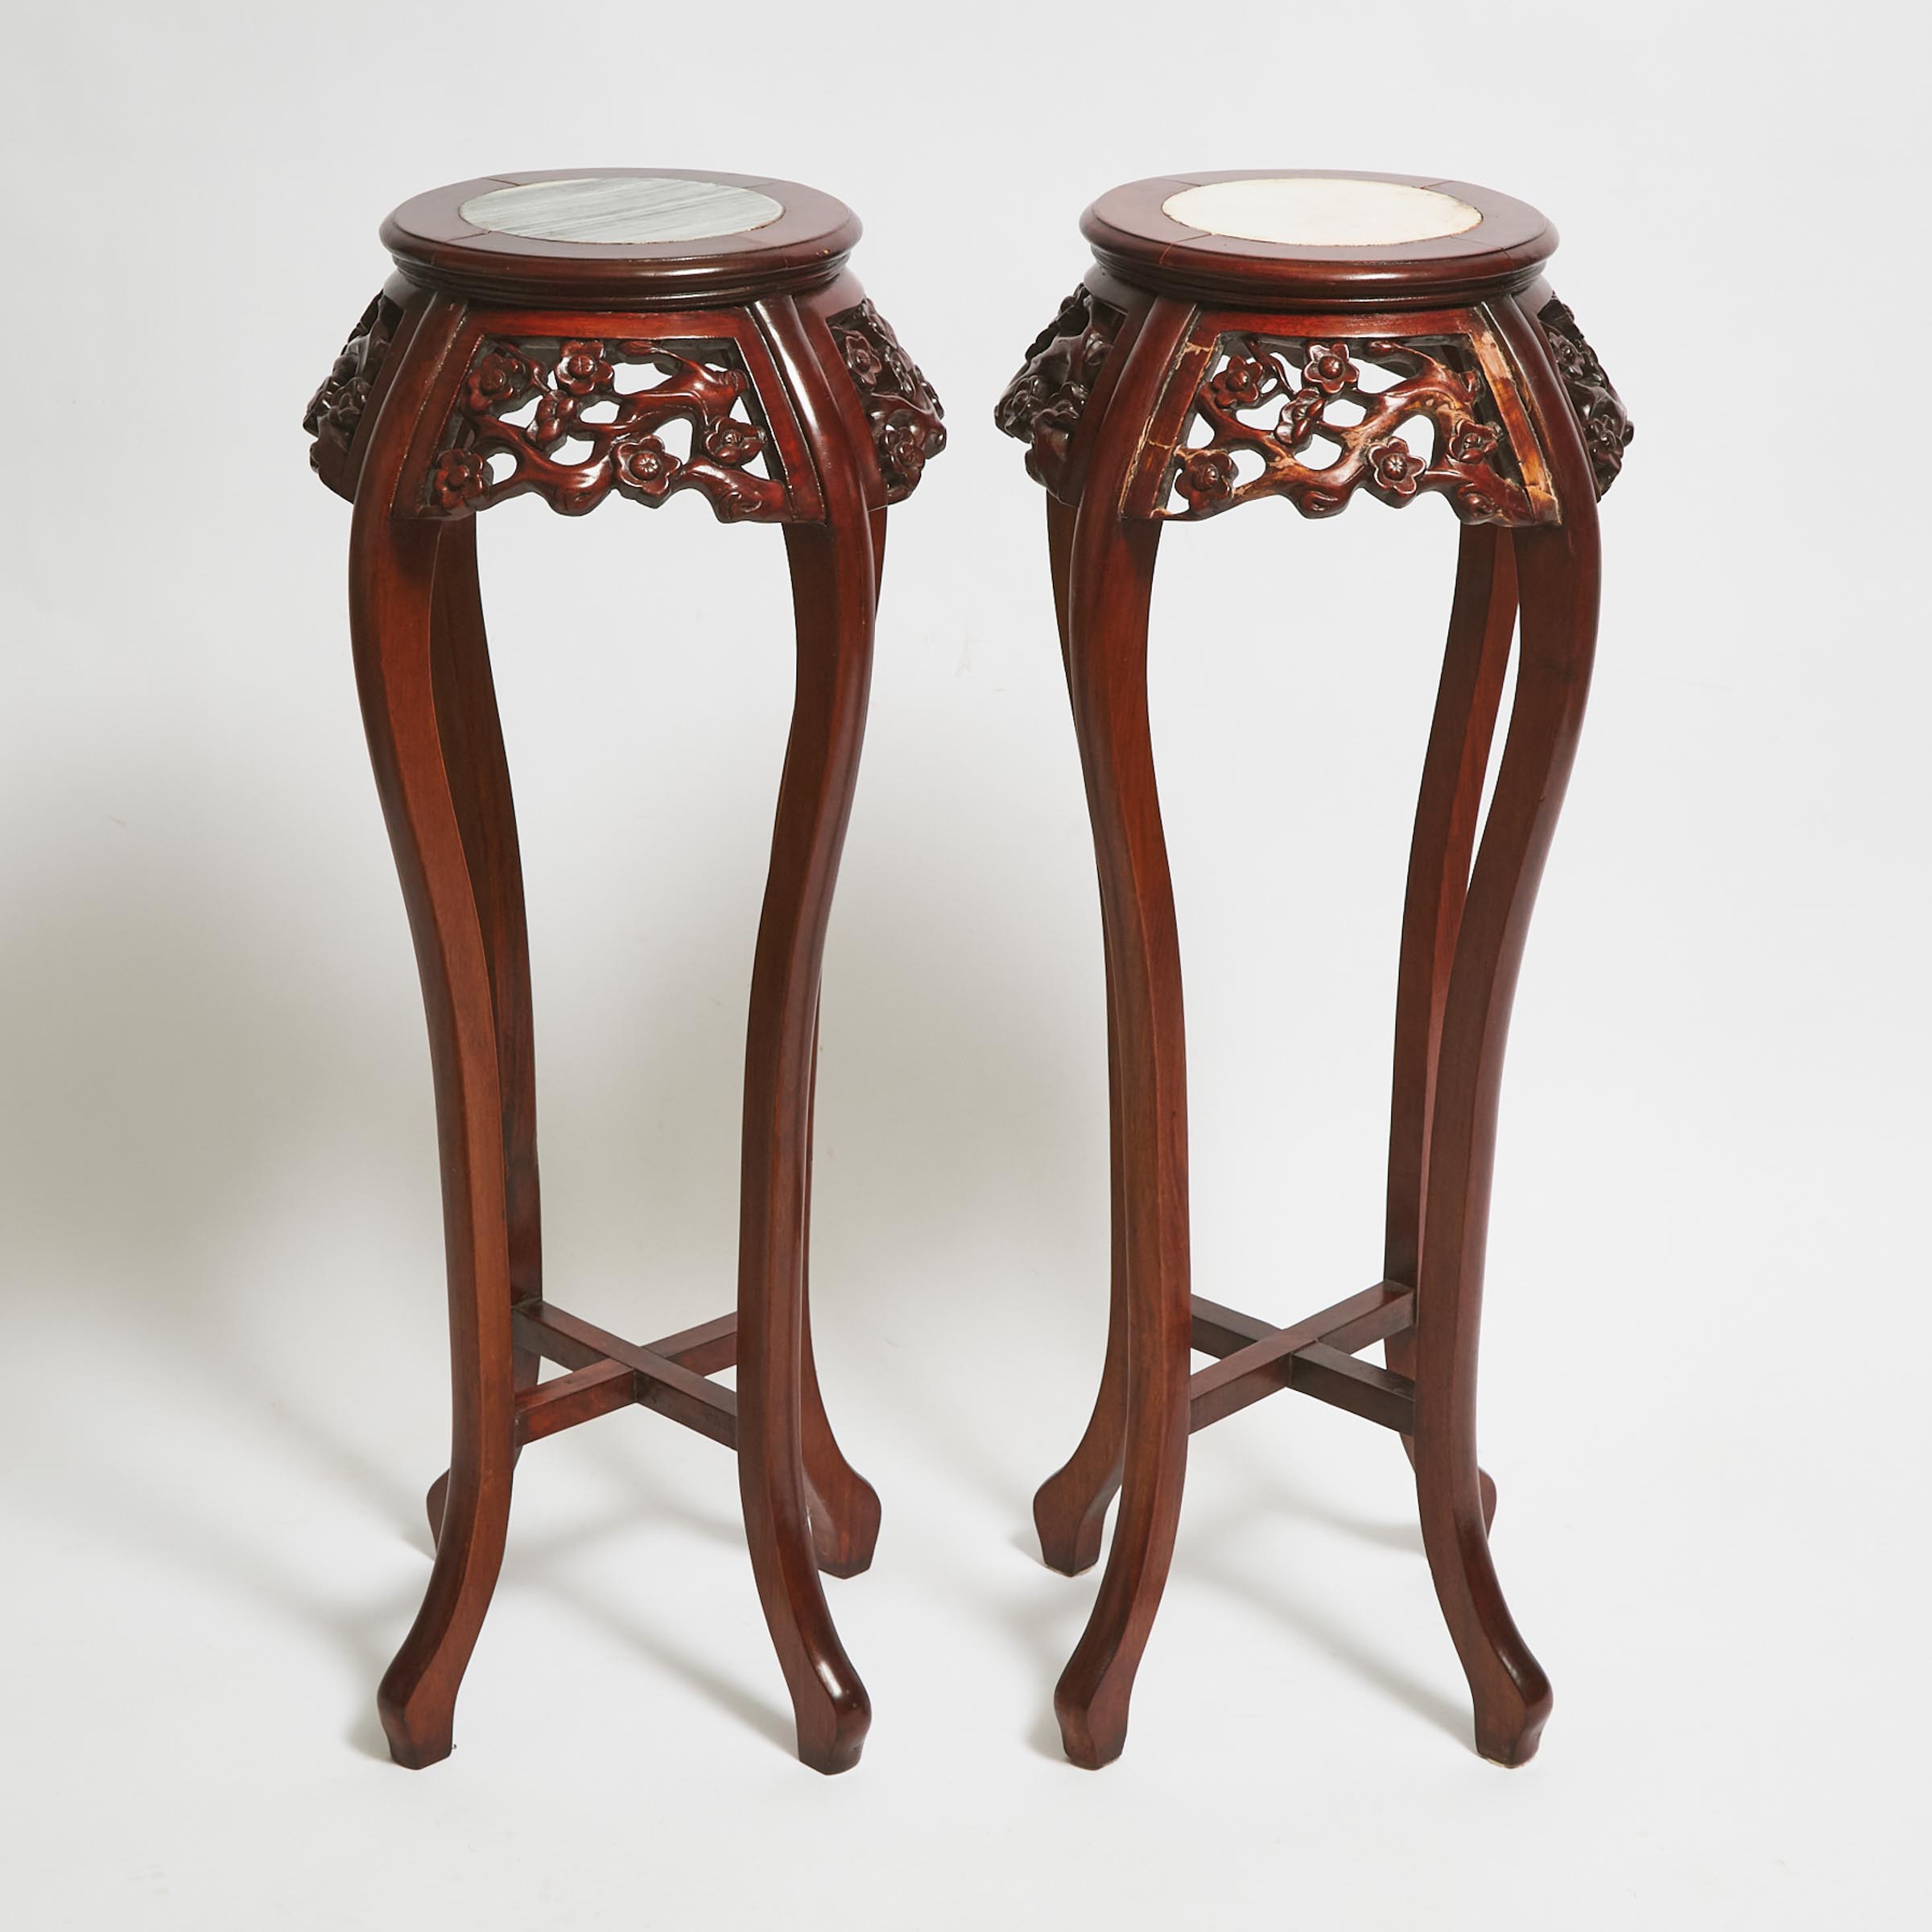 A Pair of Chinese Marble-Inset